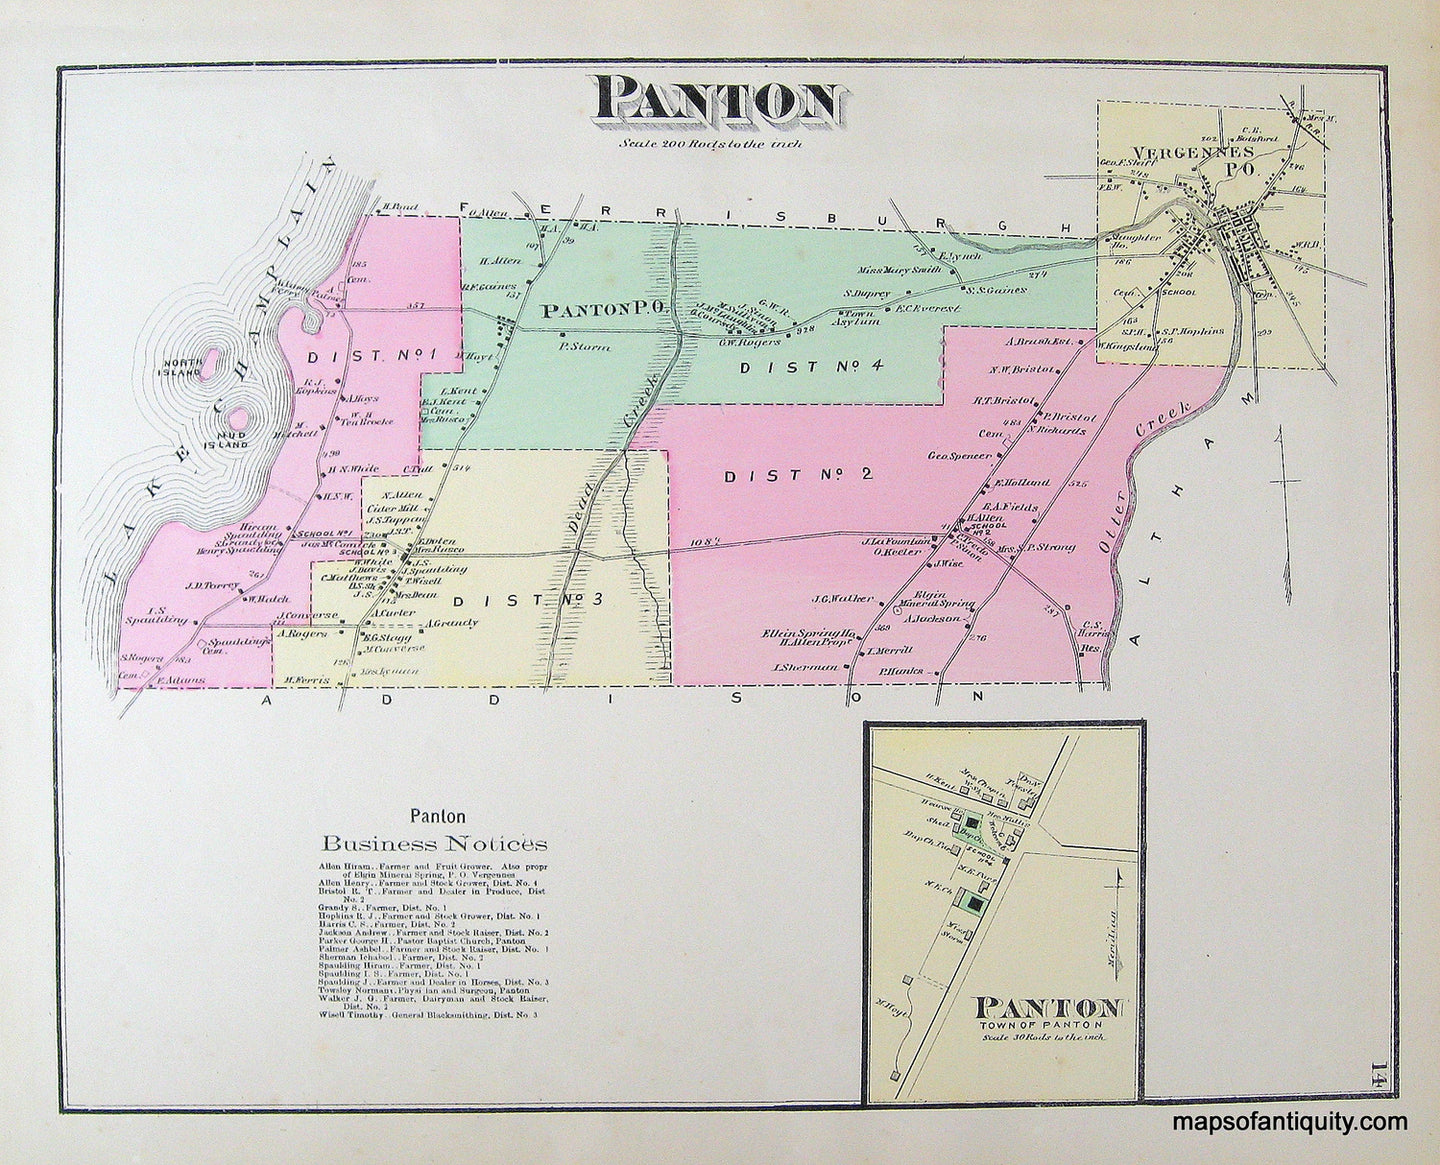 Antique-Hand-Colored-Map-Panton-Panton-Town-of-VT---Vermont-United-States-Northeast-1871-Beers-Maps-Of-Antiquity